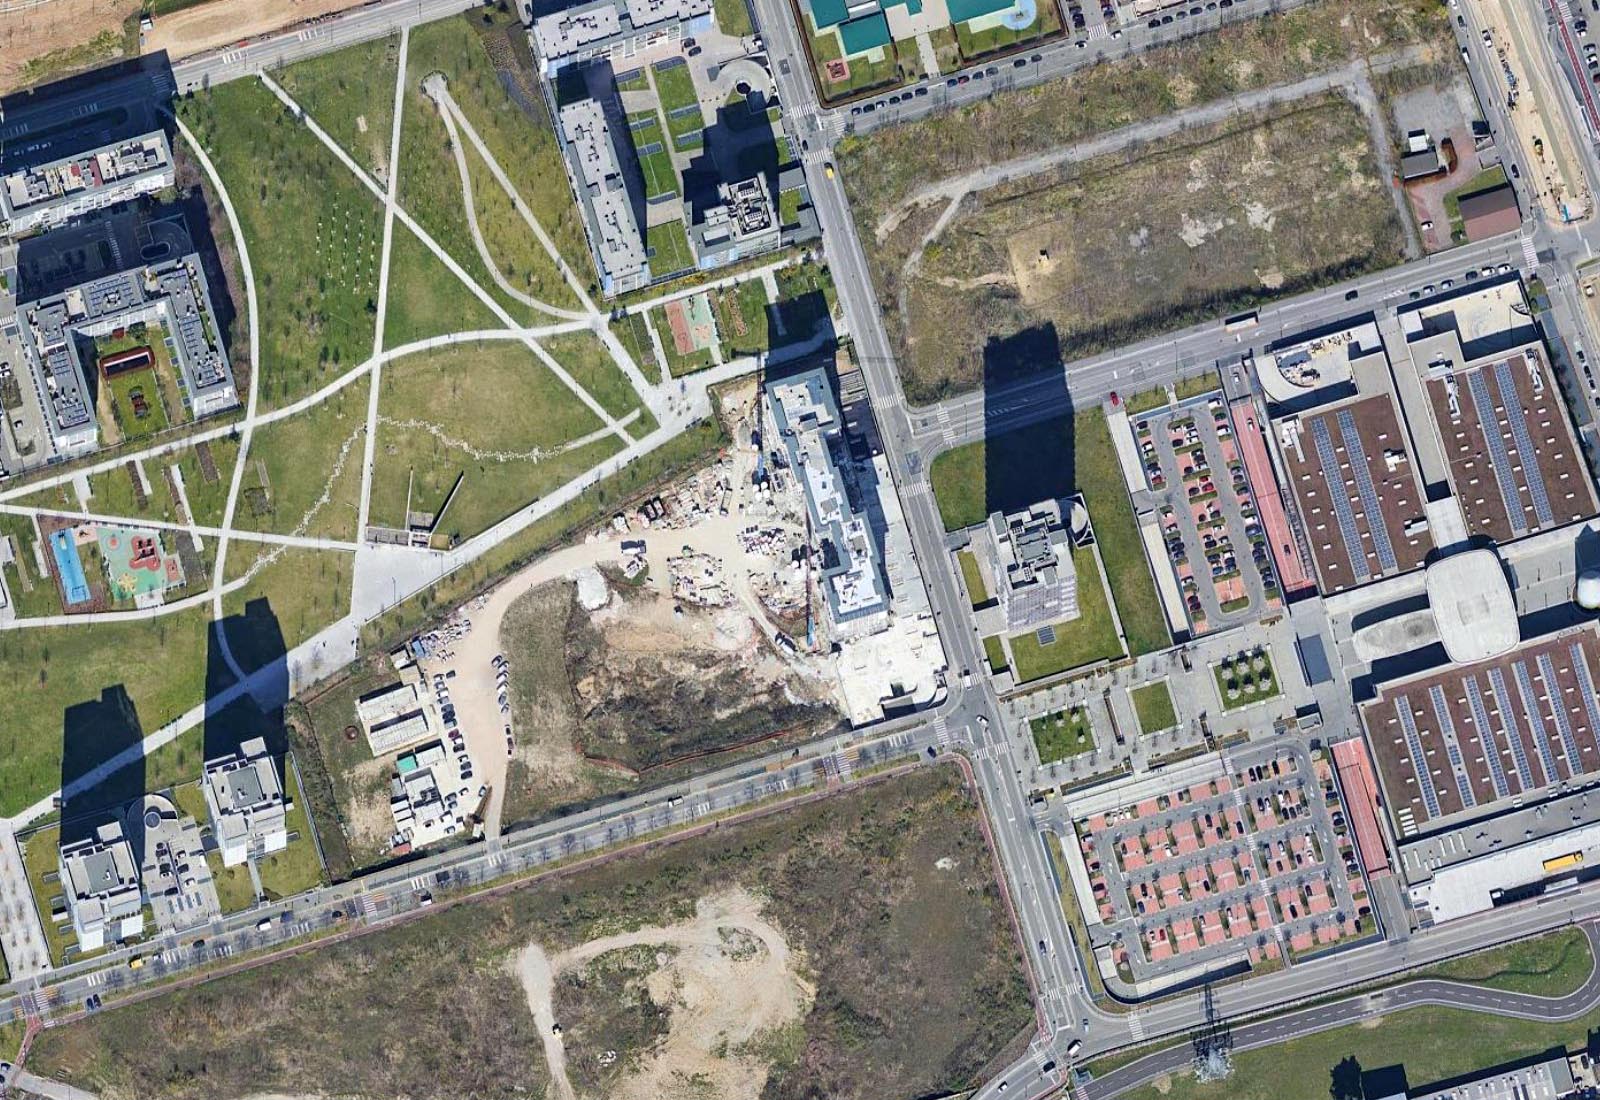 Sabina house Milan - Aerial view of the intervention site